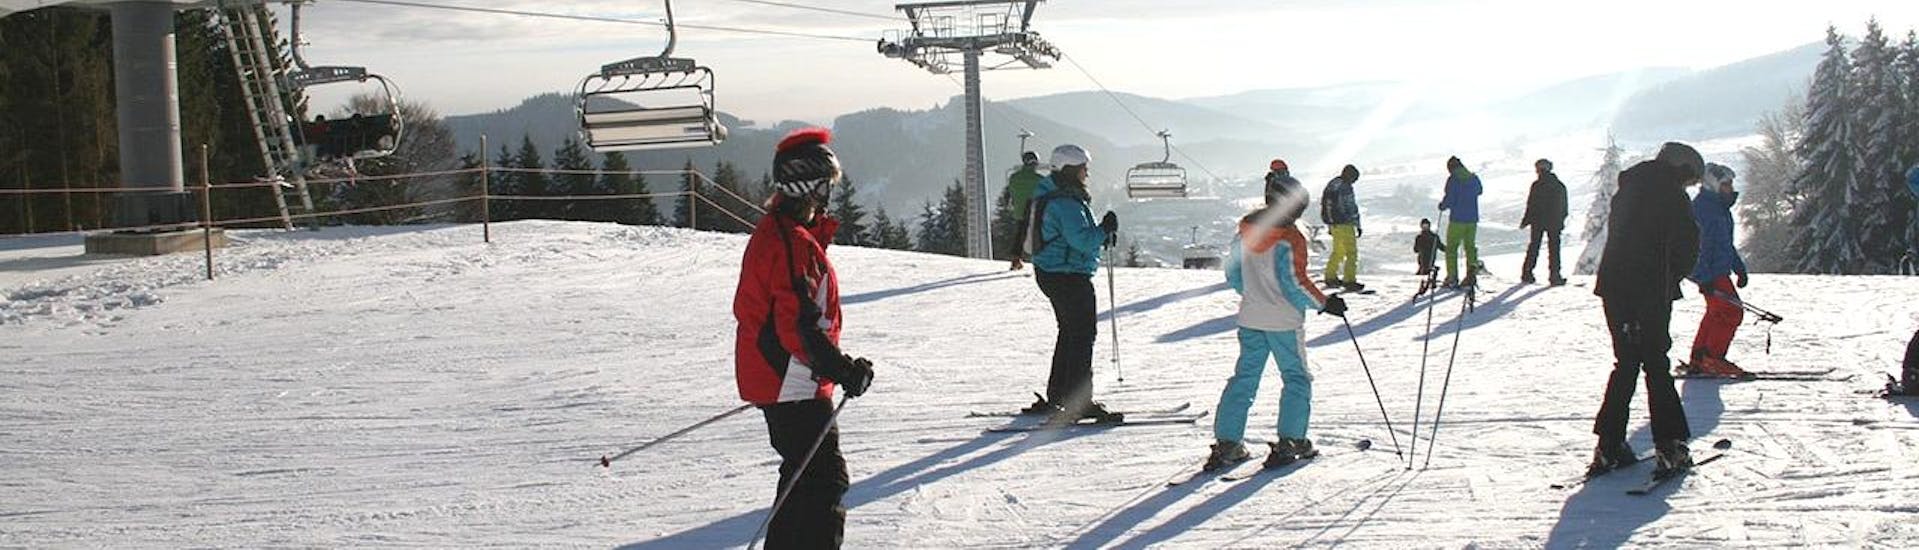 During the Private Ski Lessons for Adults - All Levels, an adult is getting ready for his course under the guidance of a certified ski instructor from the ski school Skischule Snow & Bike Factory Willingen.